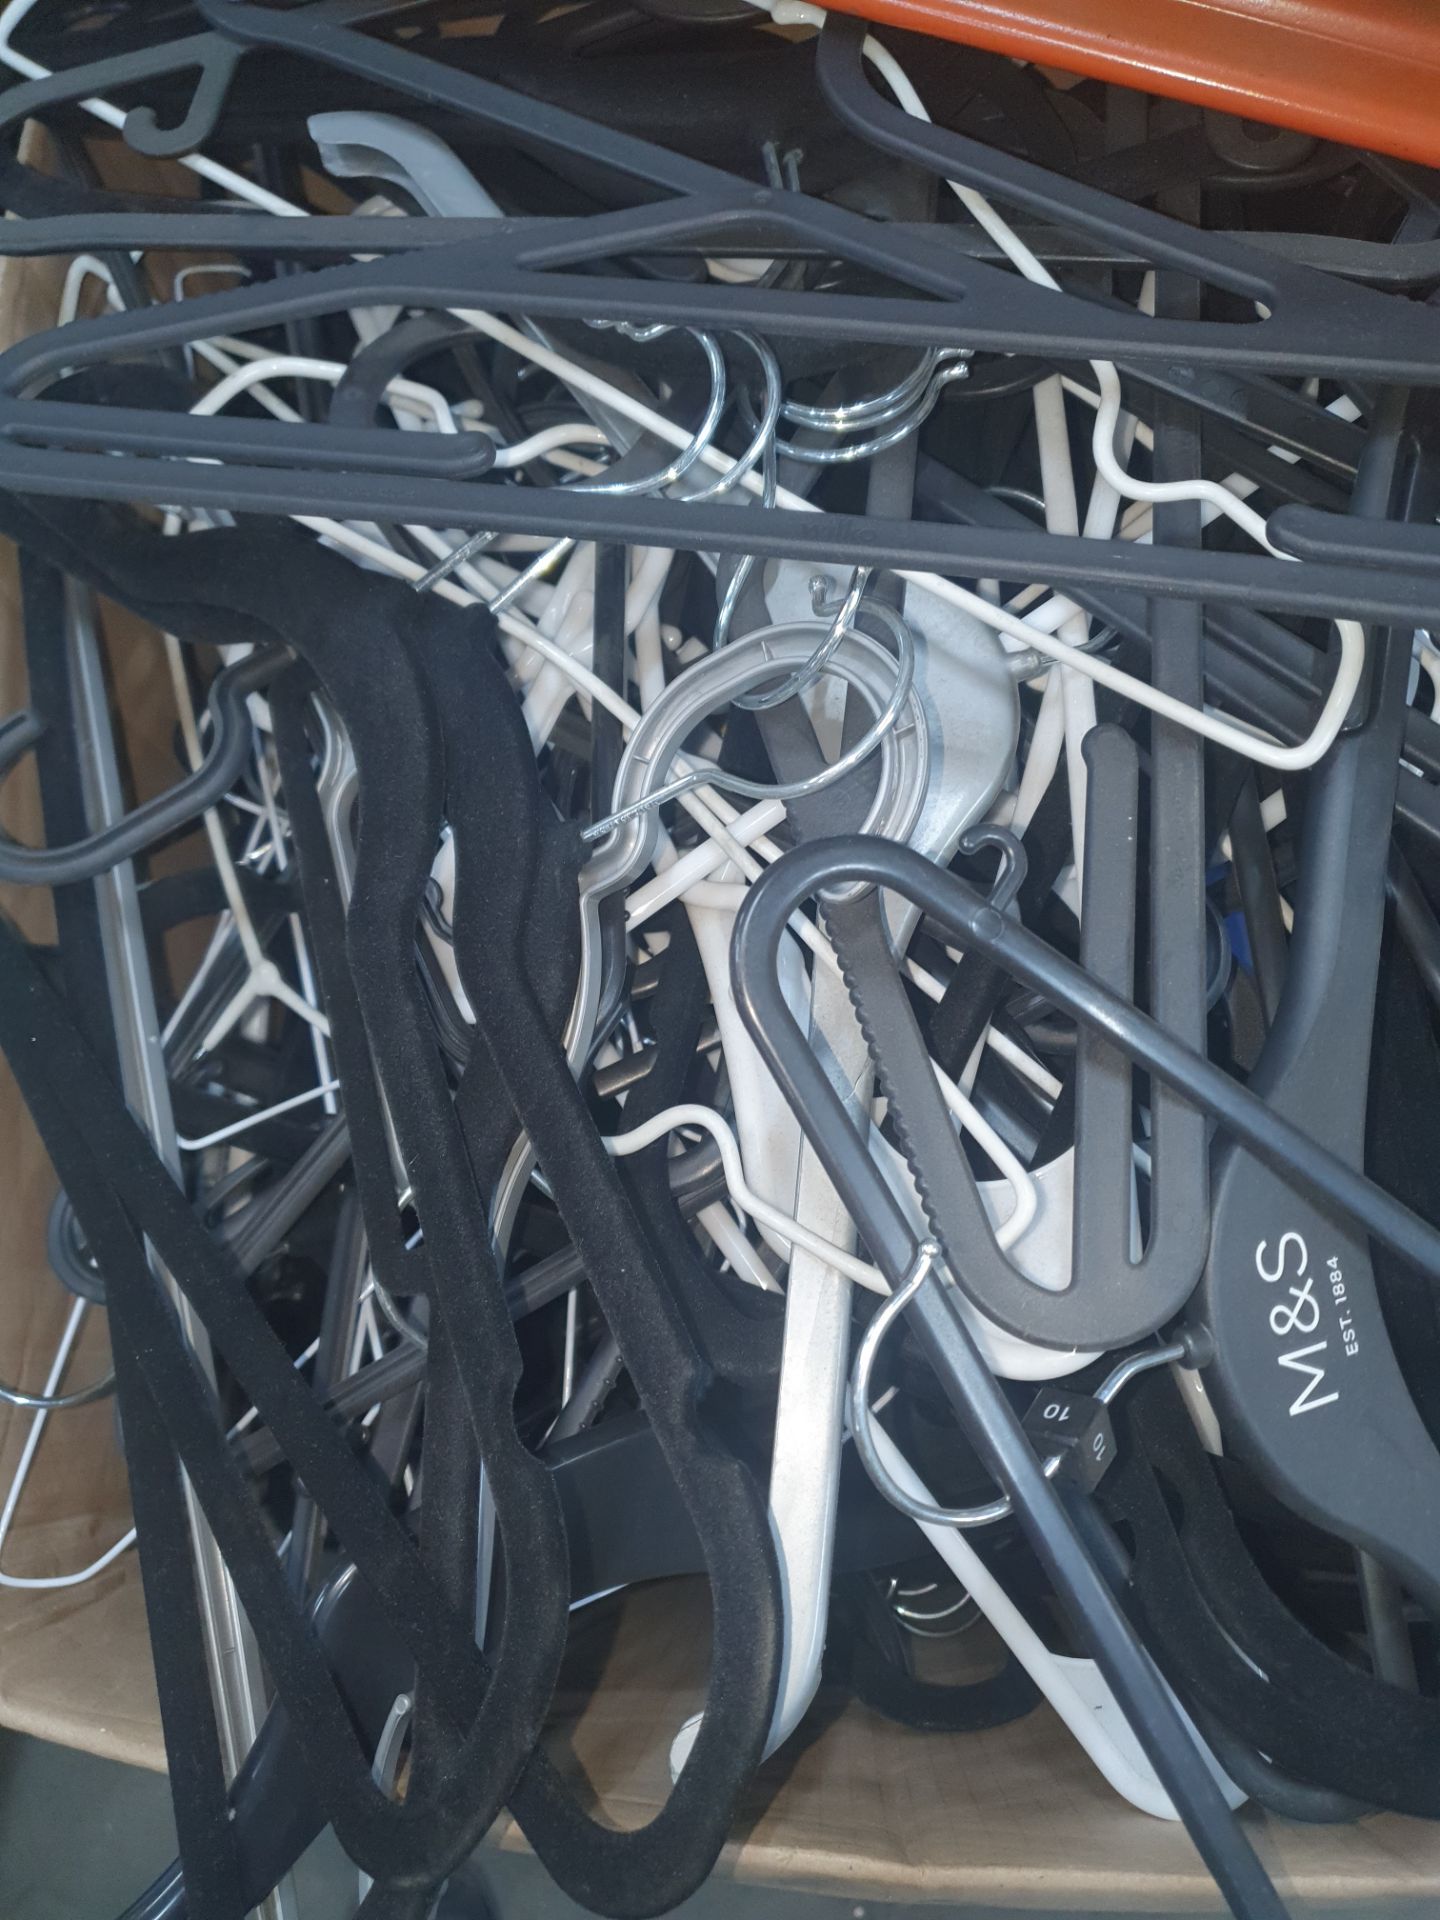 Large Quantity Of Various Hangers - Image 2 of 3